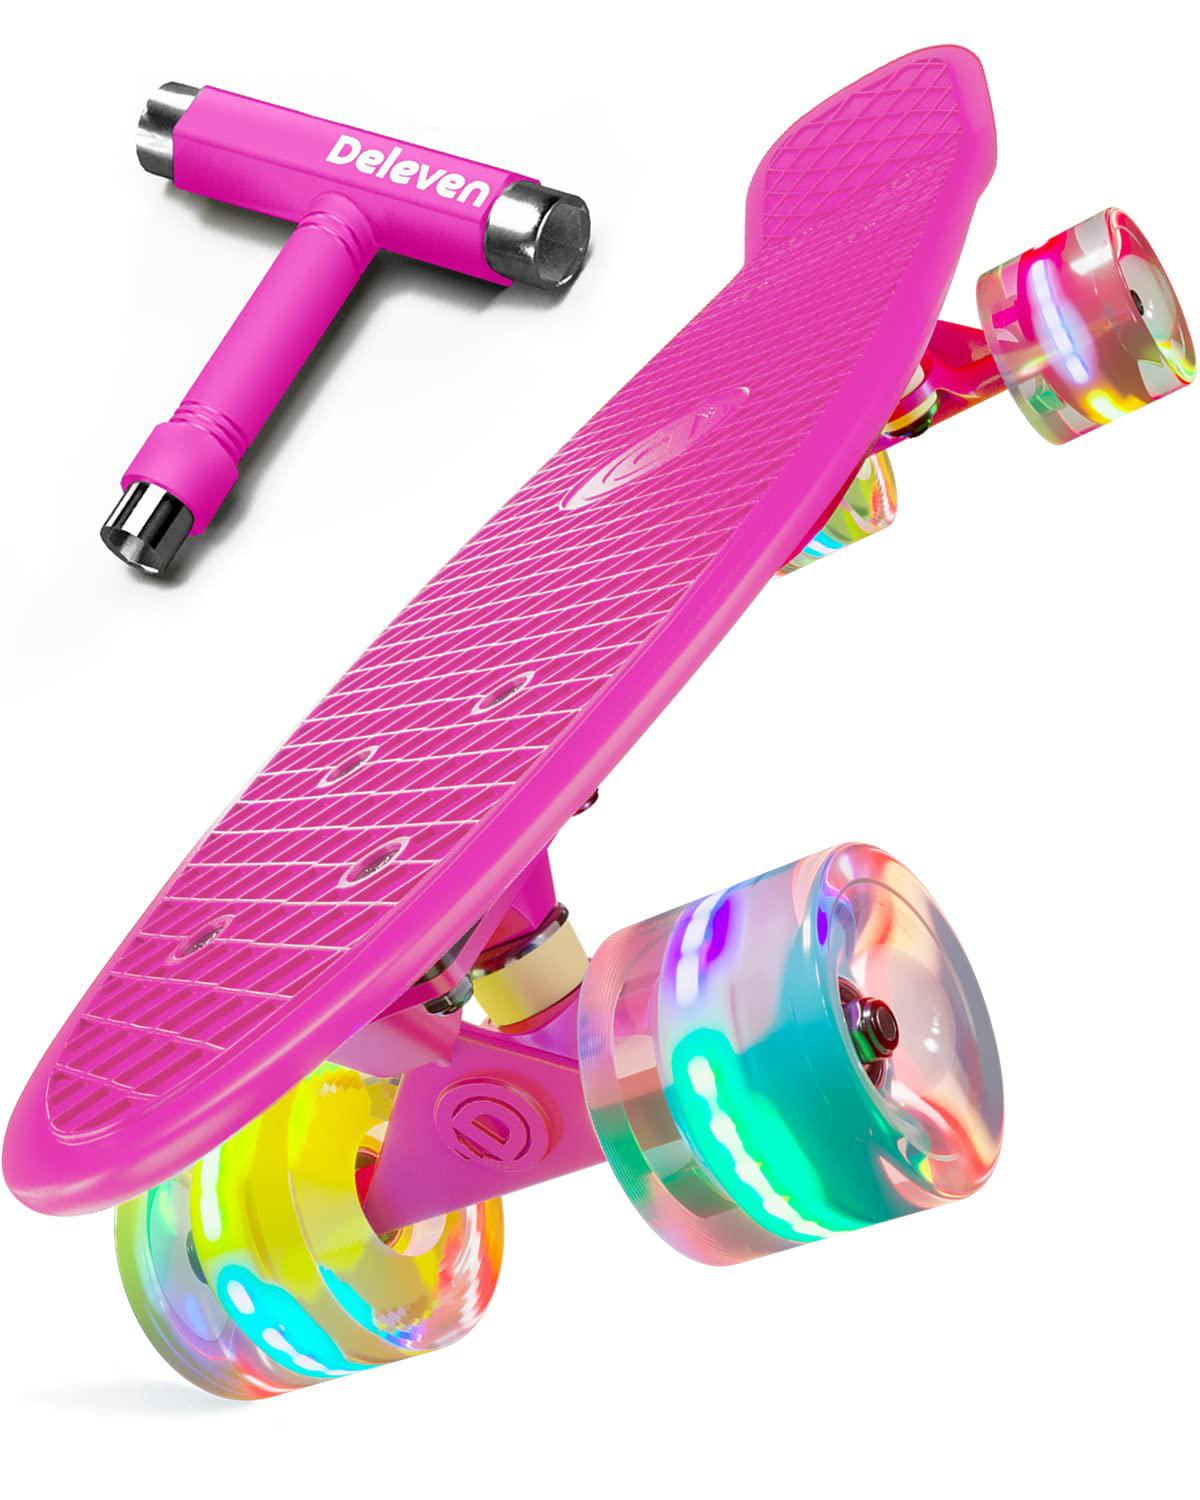 D Deleven deleven 22" skateboard with bright led wheels, skate tool, abec 7 bearings - for kids beginners adults